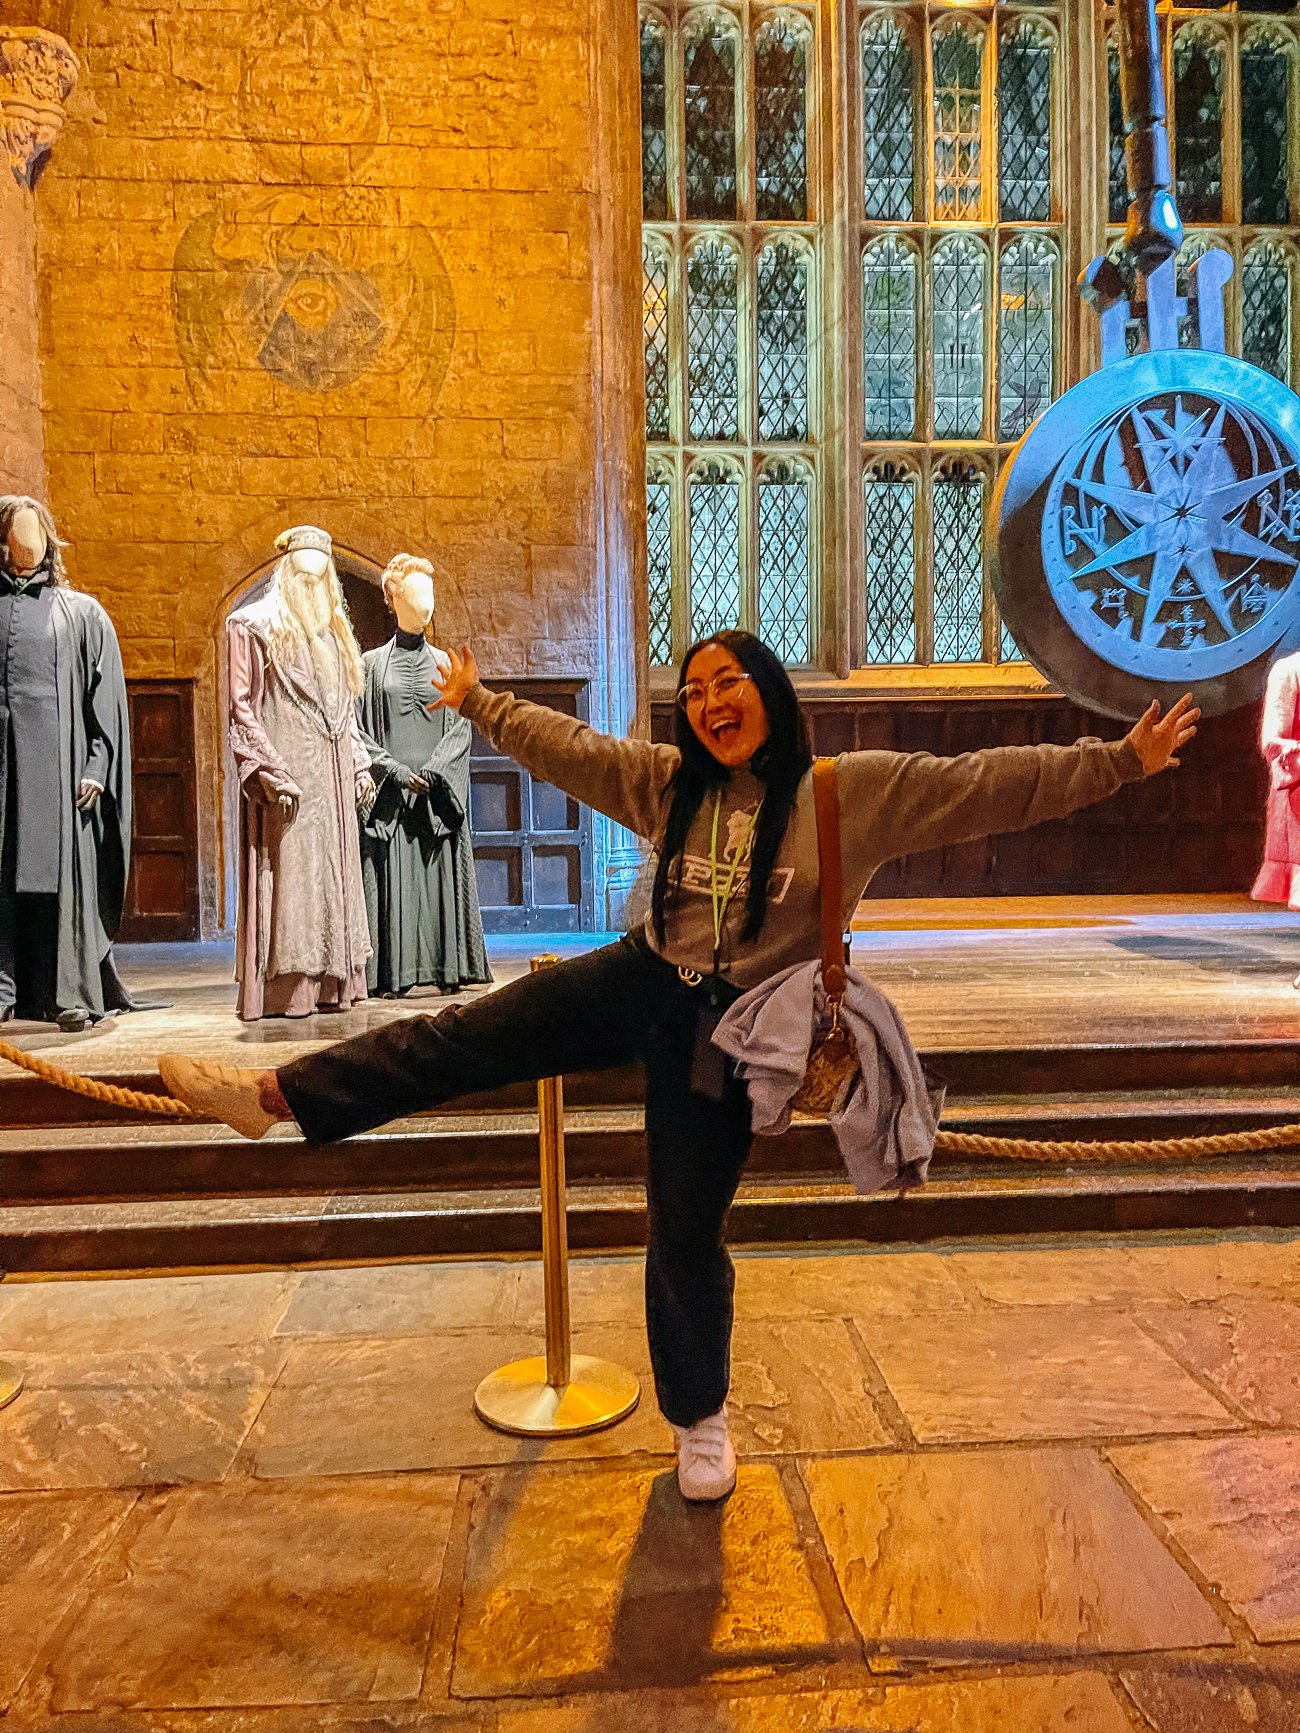 Great Hall at Harry Potter studio tour